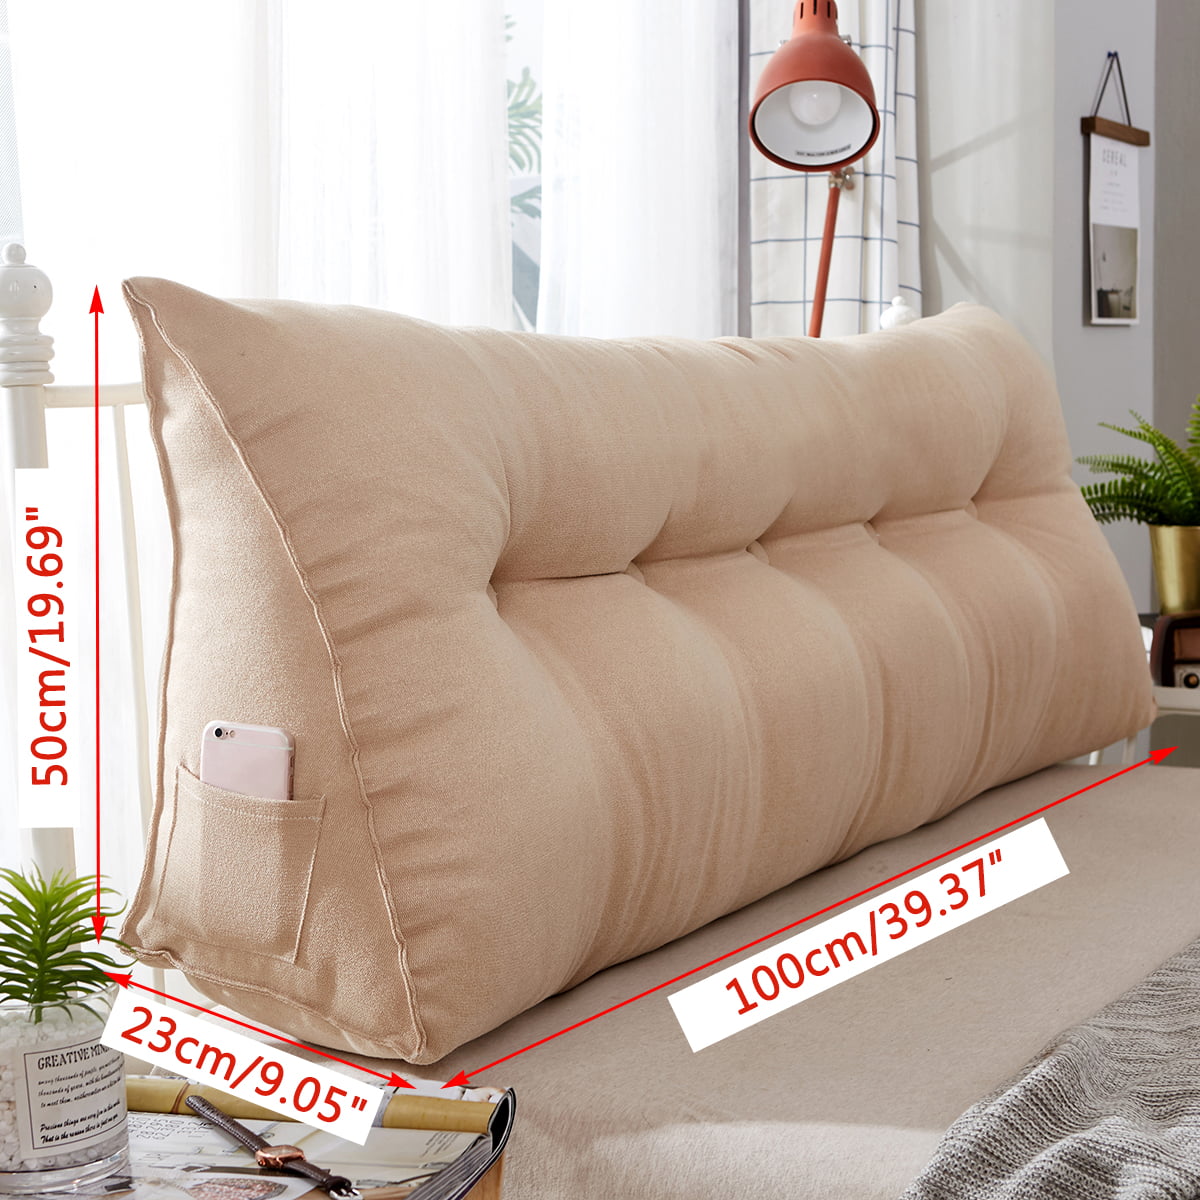 Details about   39'' Back Bolster Triangular Wedge Reading Pillow Headboard Daybed Cushion 